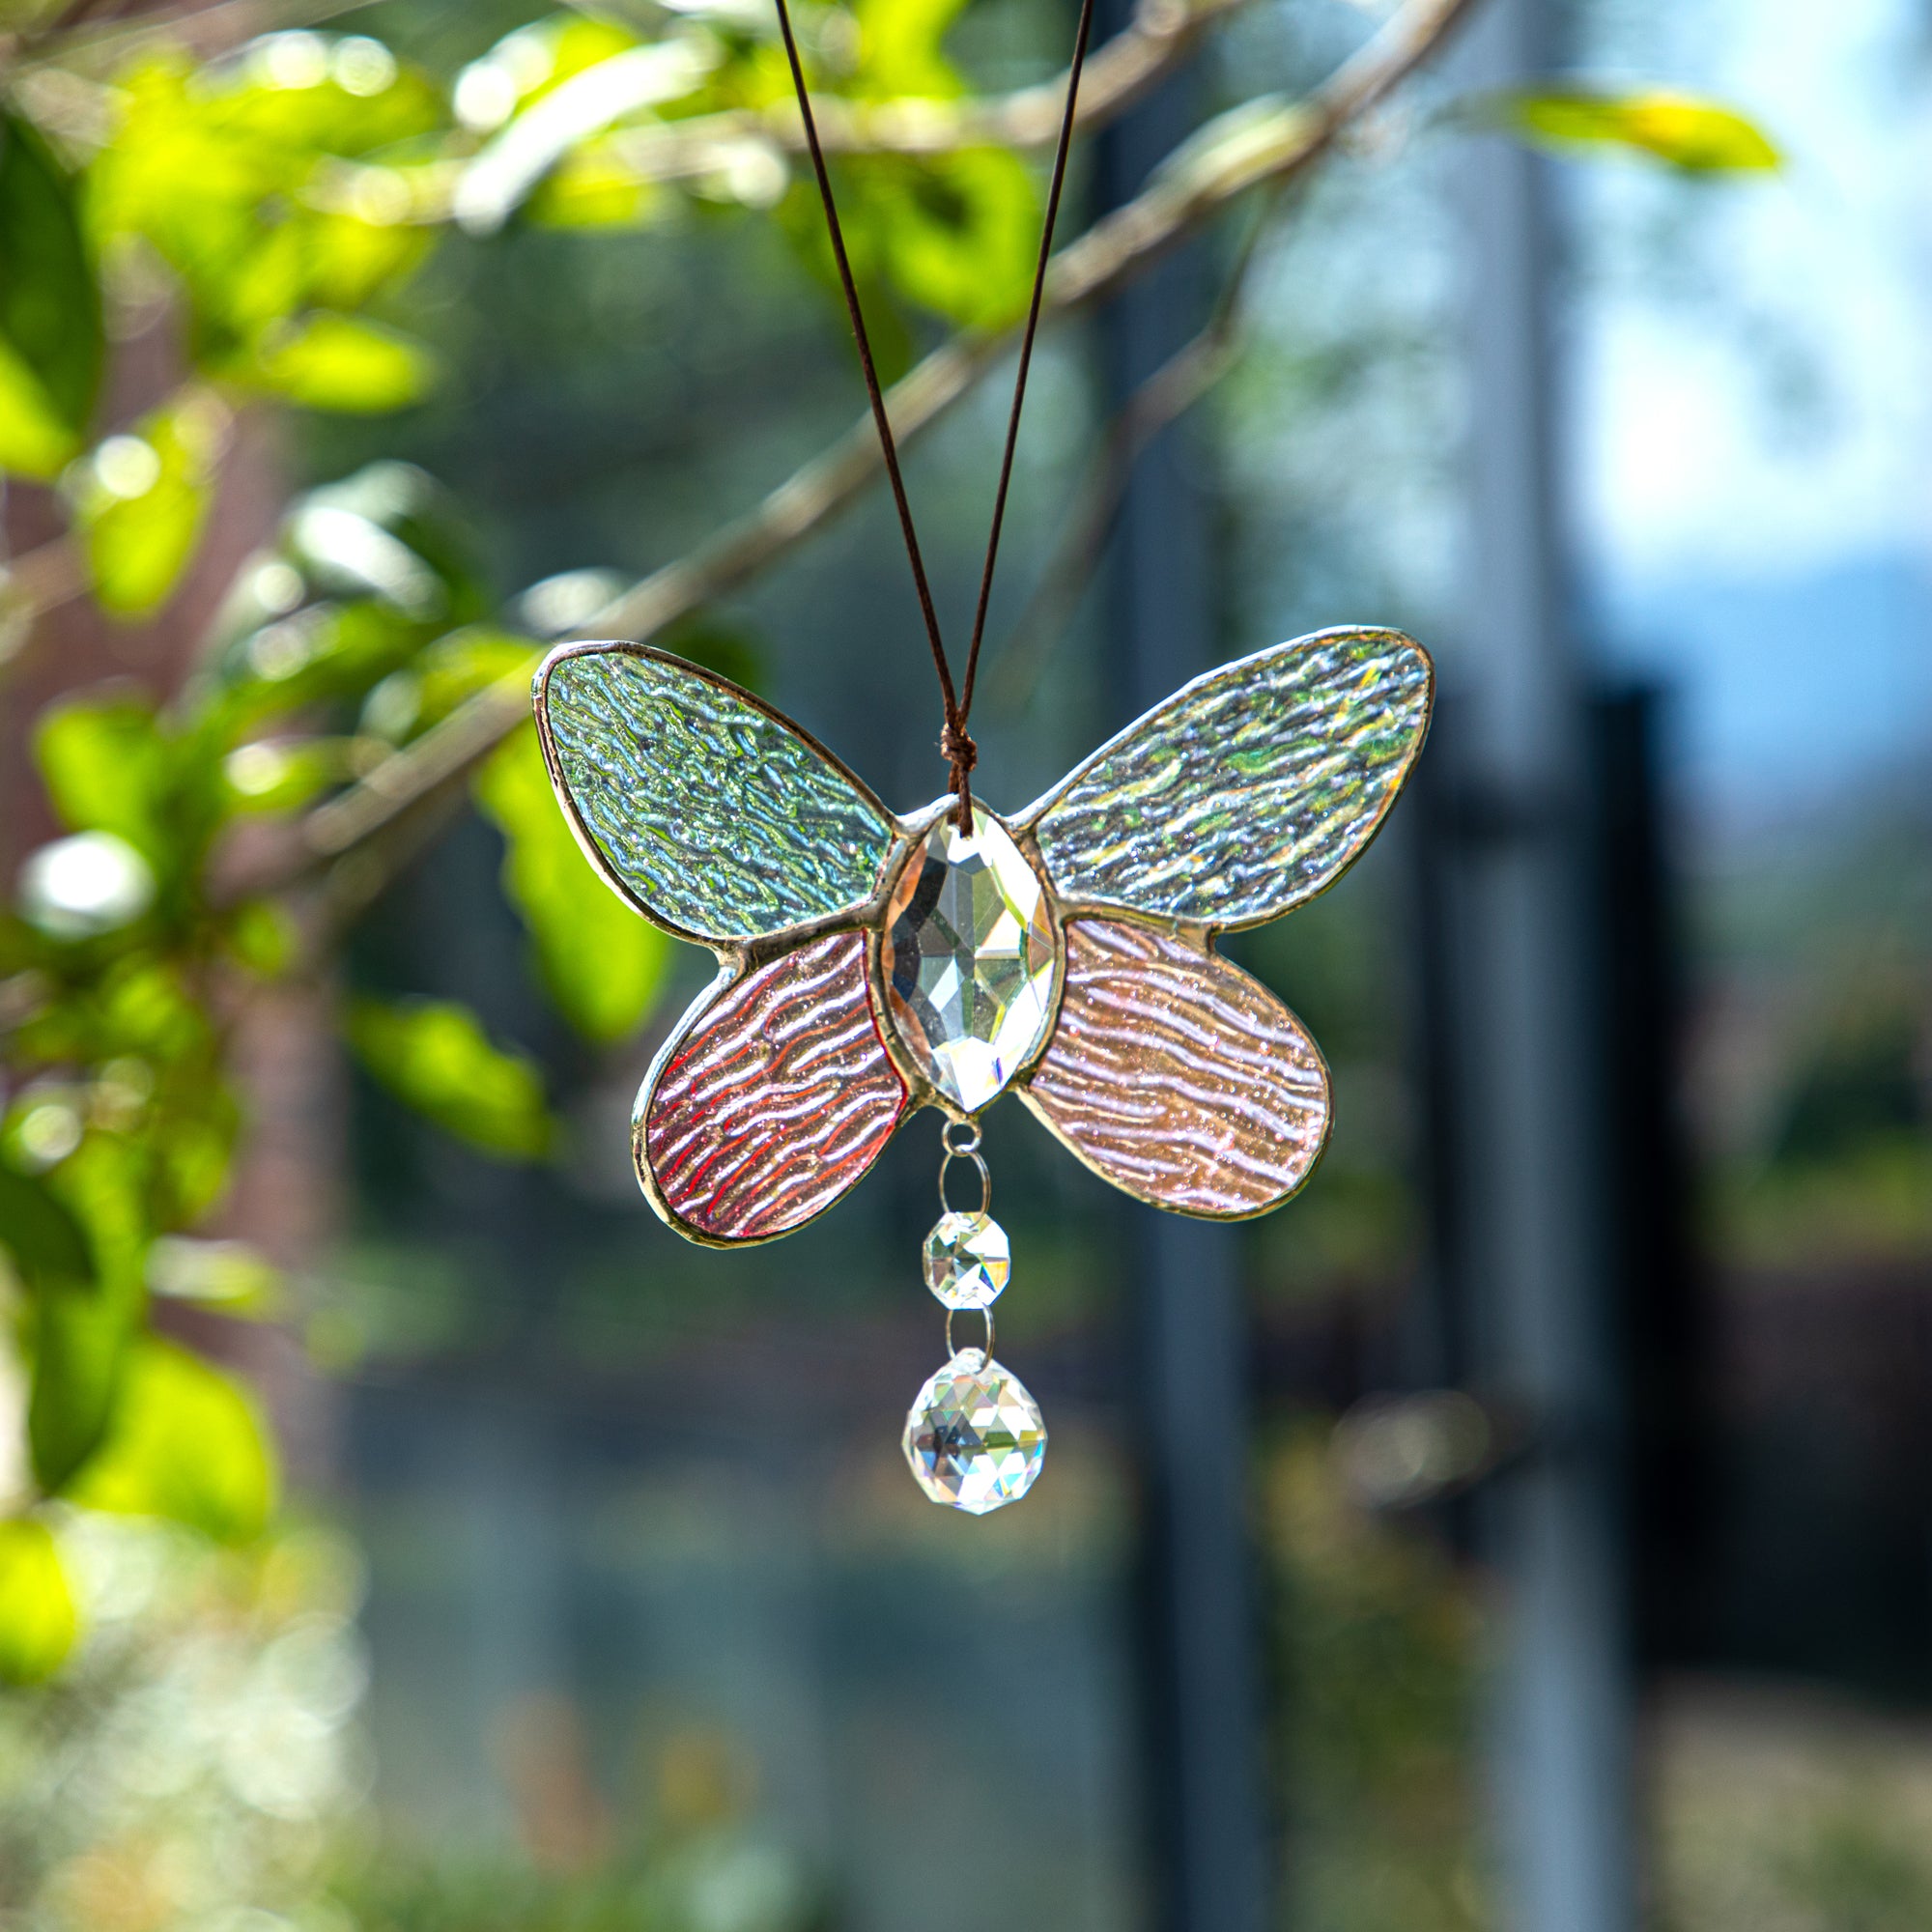 Stained Glass Angel Wings with Crystal Heart Prism Suncatcher and Stained Glass Butterfly for Window Hanging or Wall Decor, Unique Gift